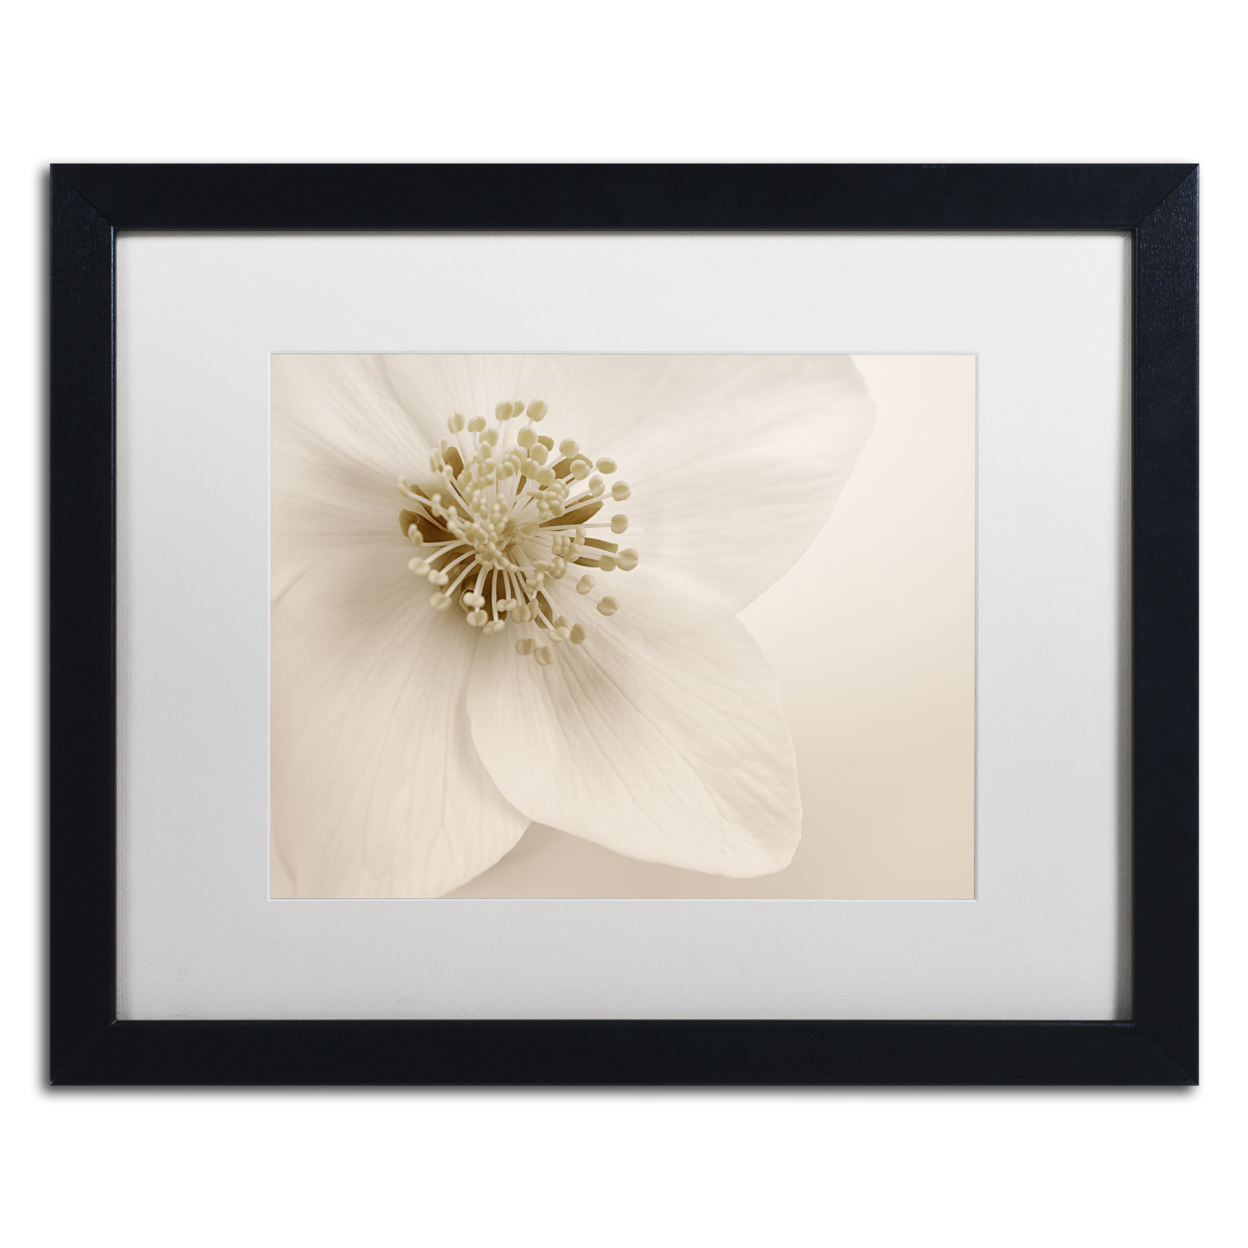 Cora Niele 'Hellebore Christmas Rose' Black Wooden Framed Art 18 X 22 Inches